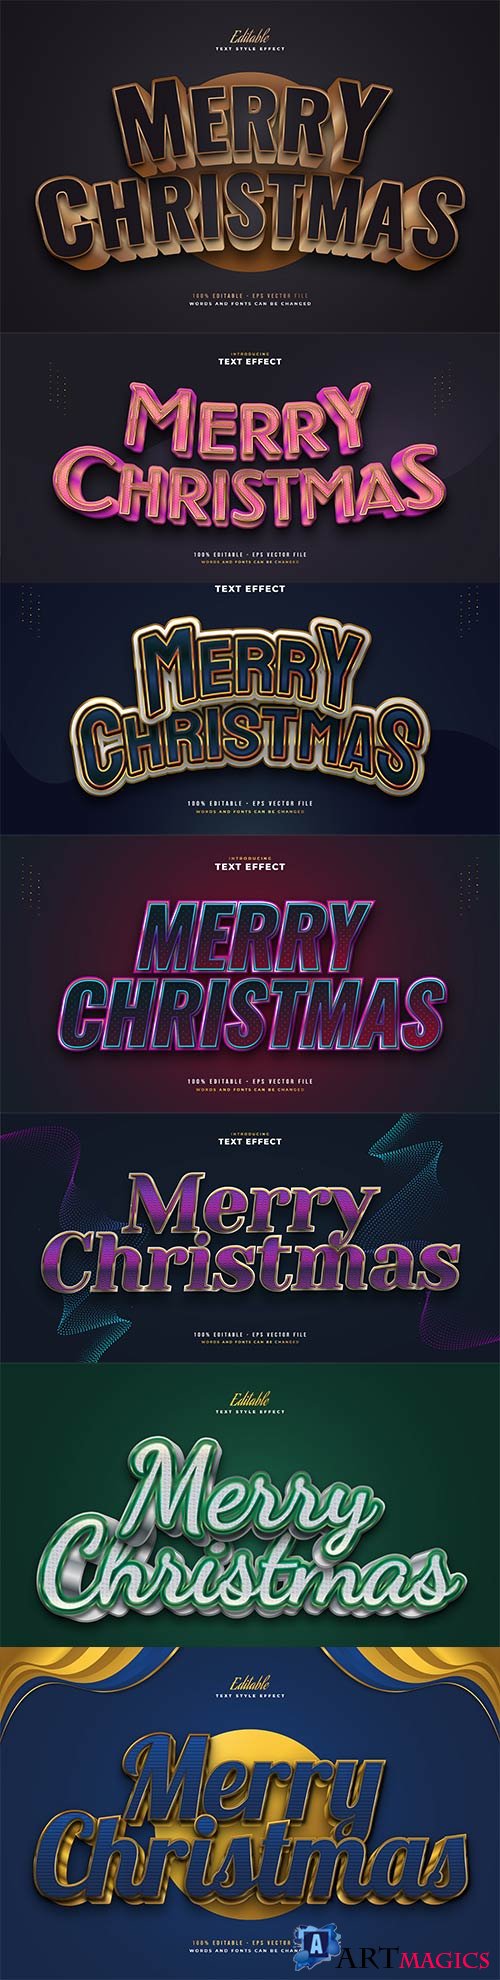 Merry christmas and happy new year 2022 editable vector text effects vol 26